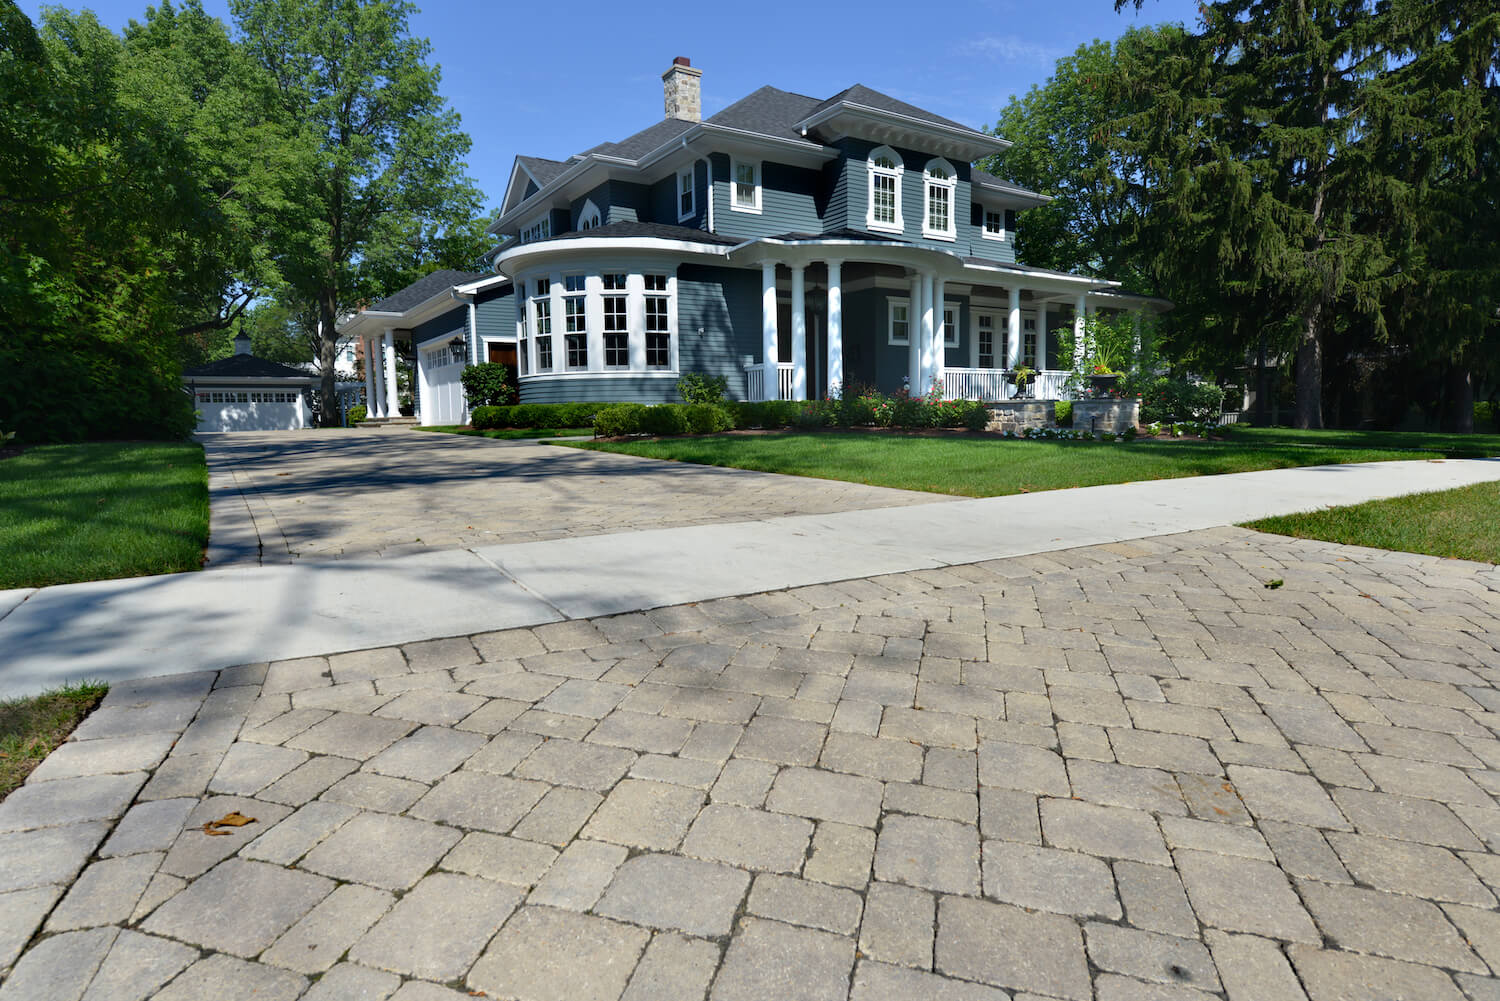 does a paver driveway increase home value